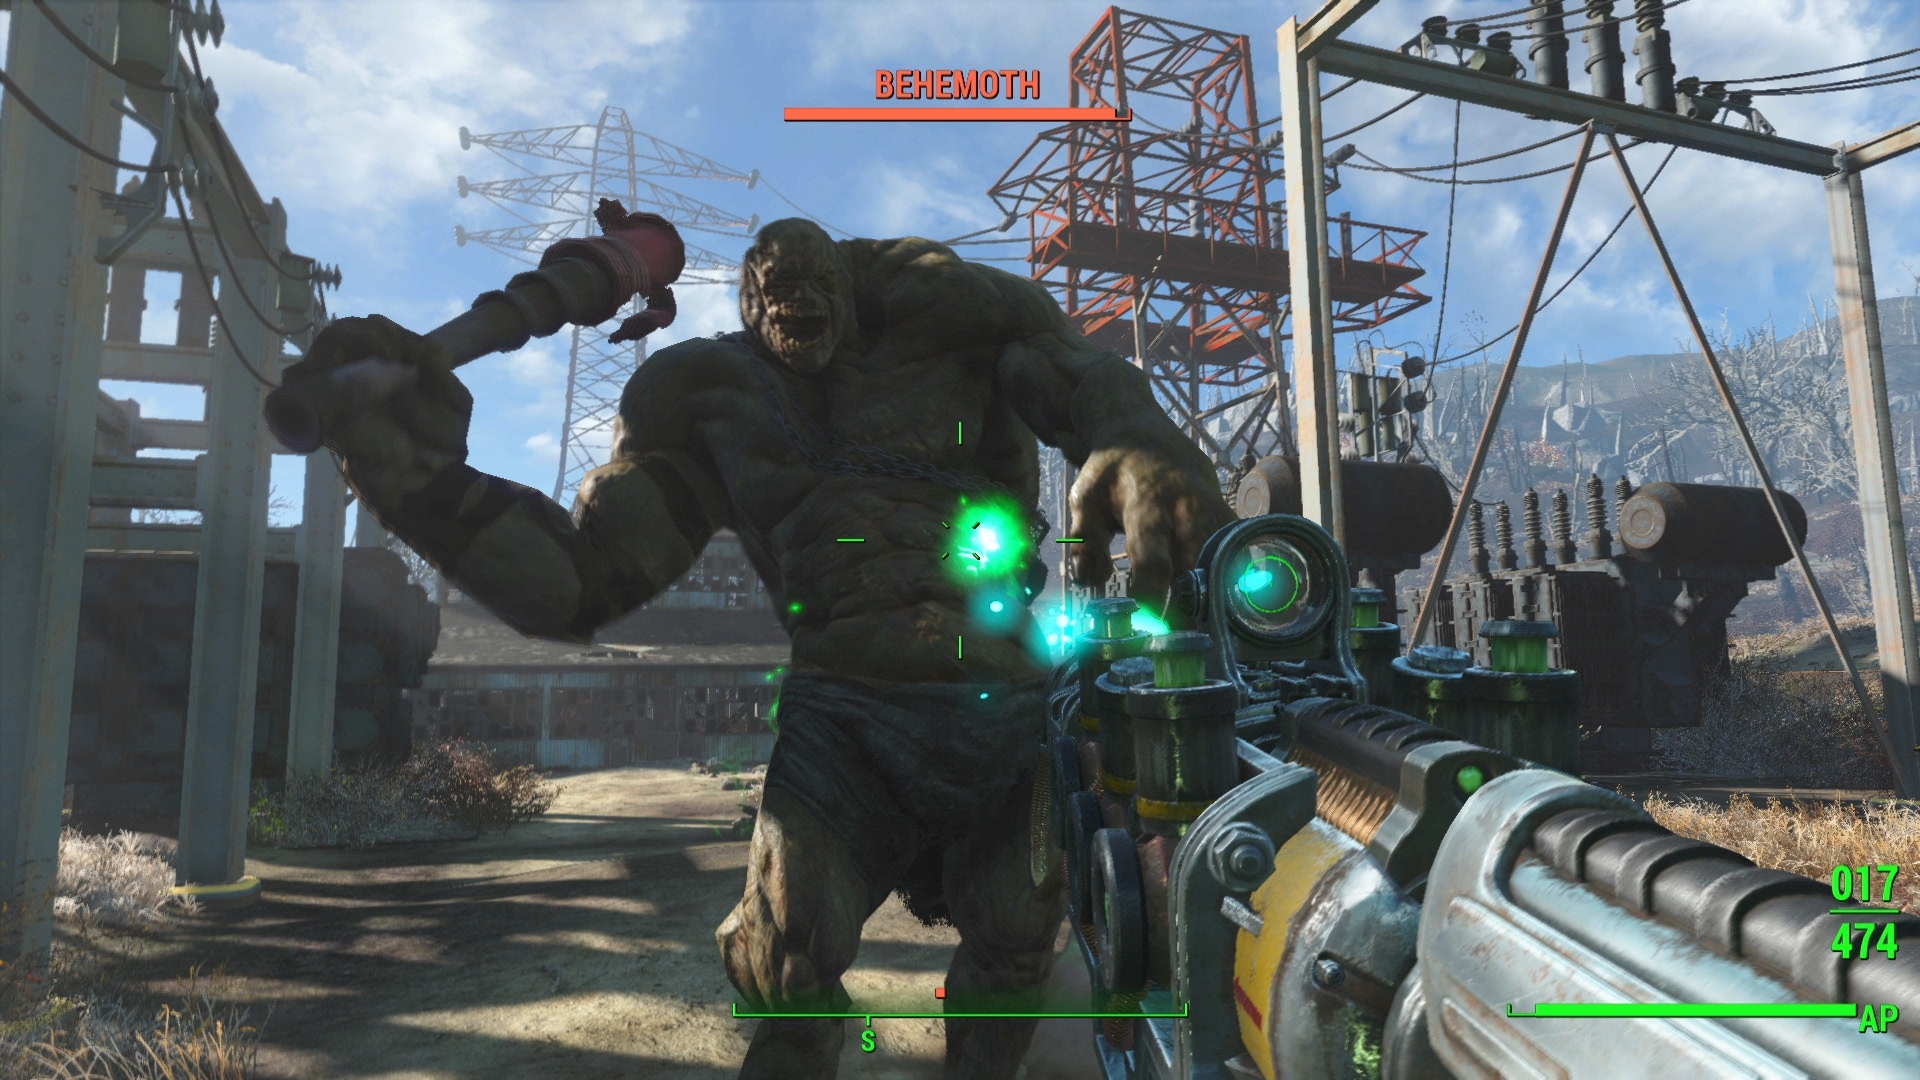 Fallout 4 coming in November, more screenshots and gameplay footage